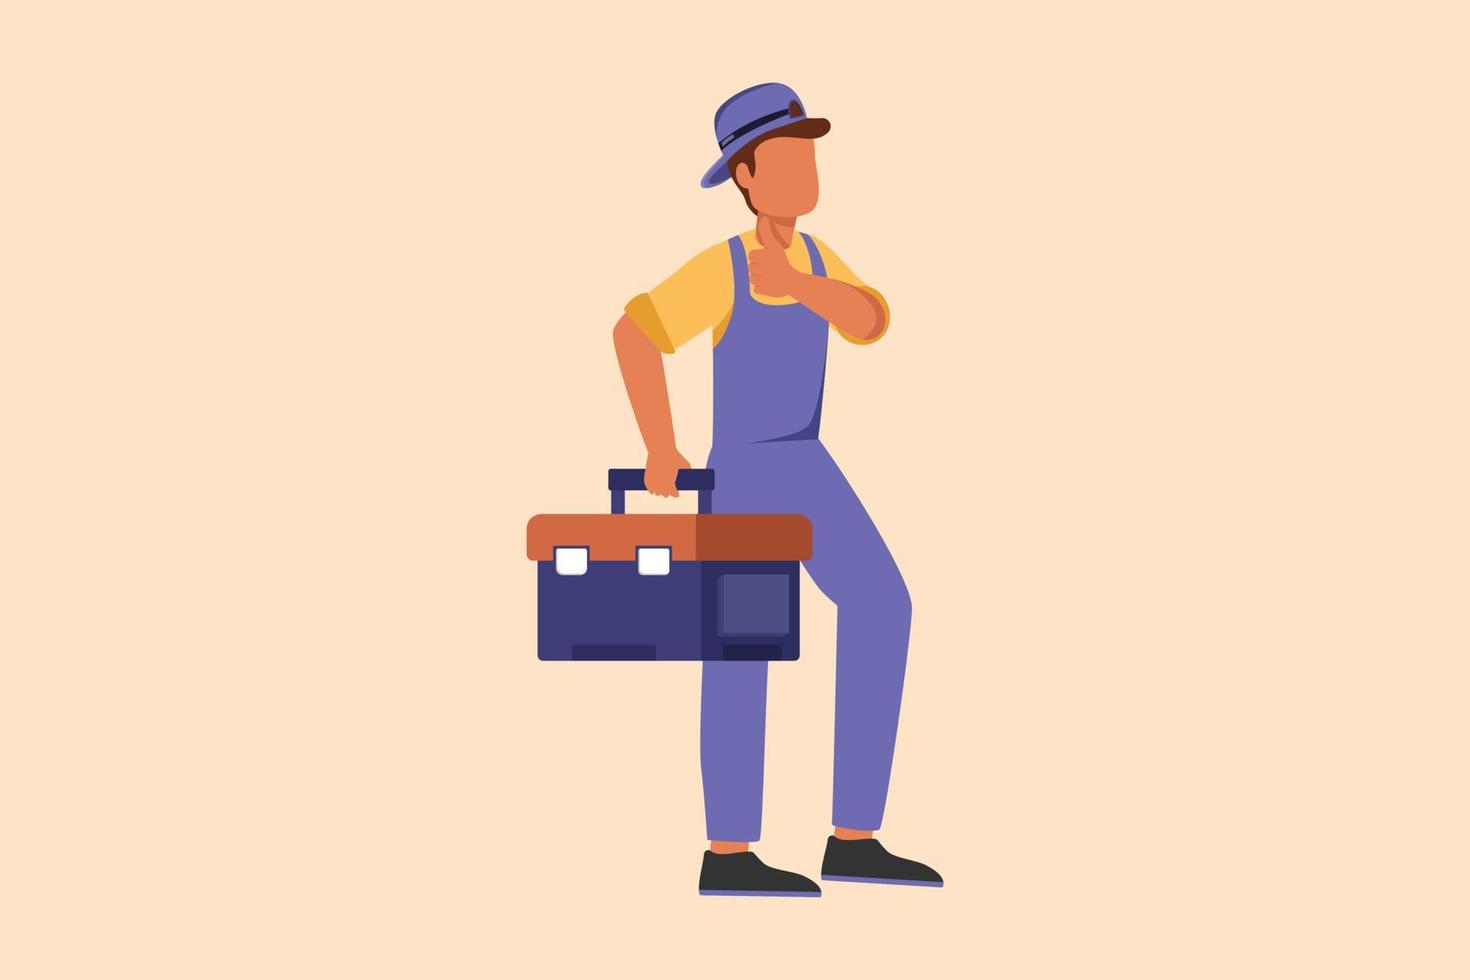 Business design drawing handyman plumber standing and holding tools box in hands. Professional repairman in overalls ready for work. Home decoration services. Flat cartoon style vector illustration